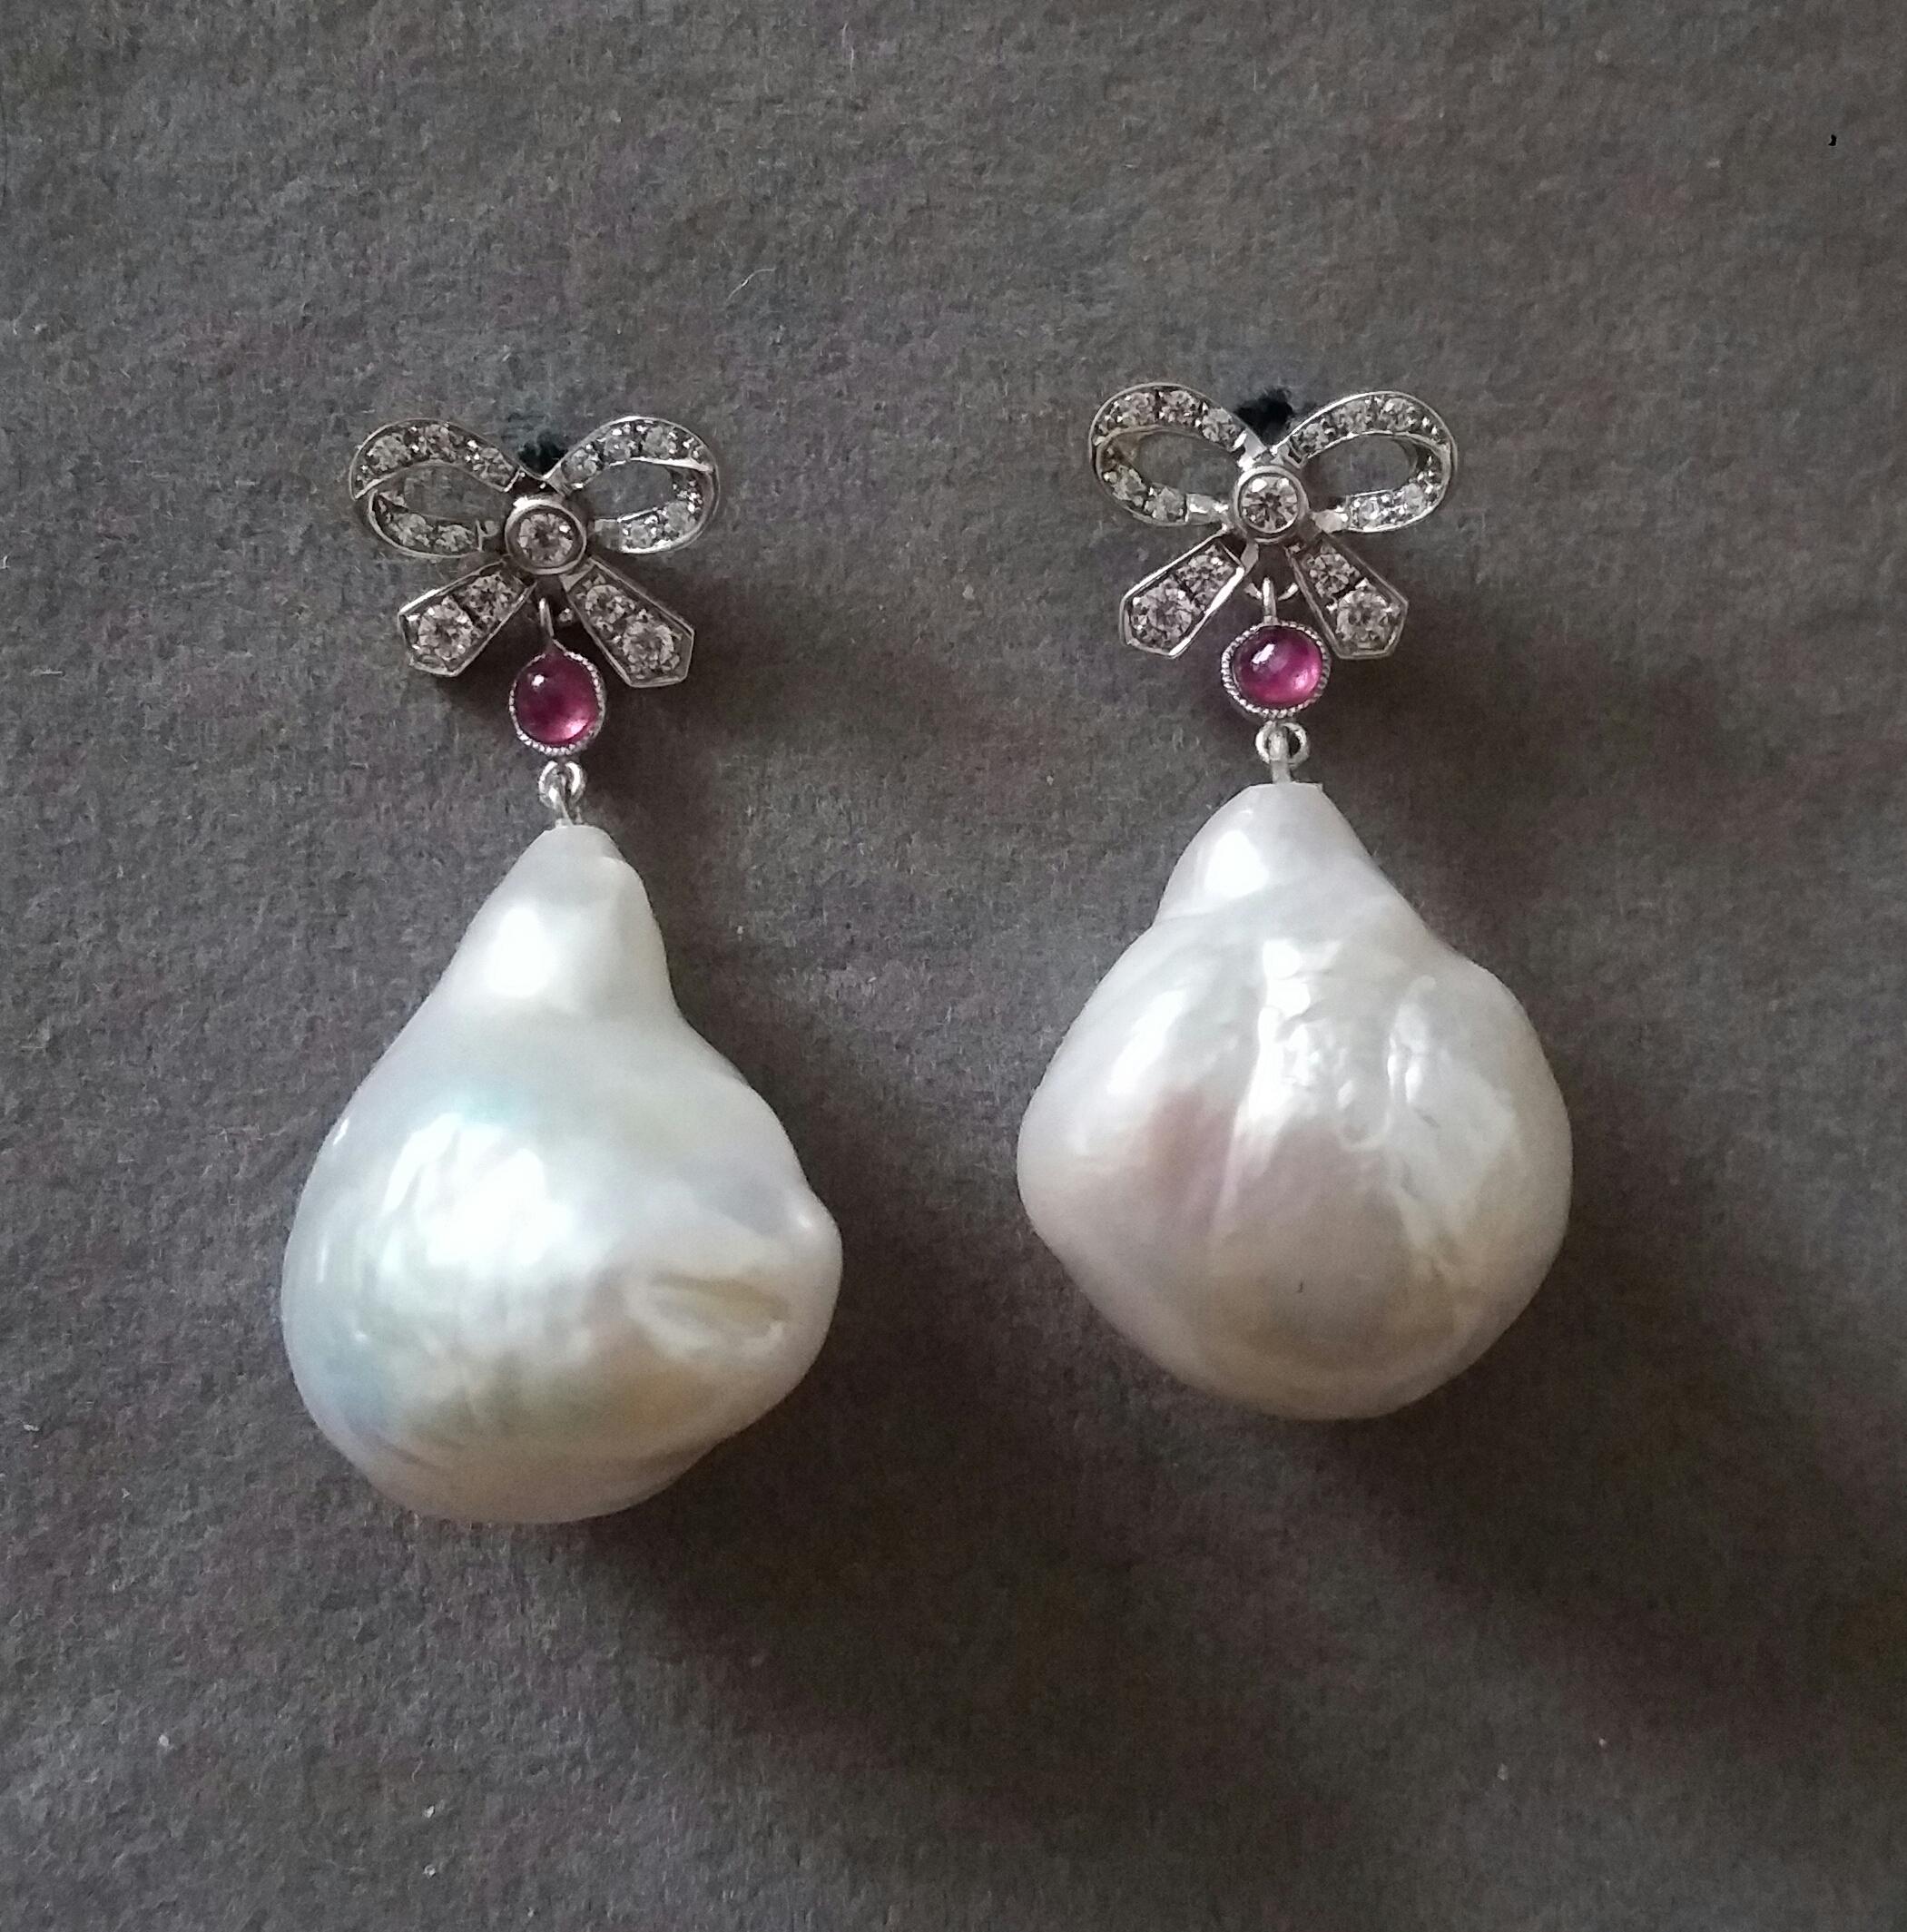 In these classic Art Deco Style earrings the tops are 2 White Gold and Diamonds  Bows, 28 round full cut diamonds and 1 pair of small round Ruby cabs ,in the lower parts we have 2 White Pear Shape Baroque Pearls in High Luster and Unique Big